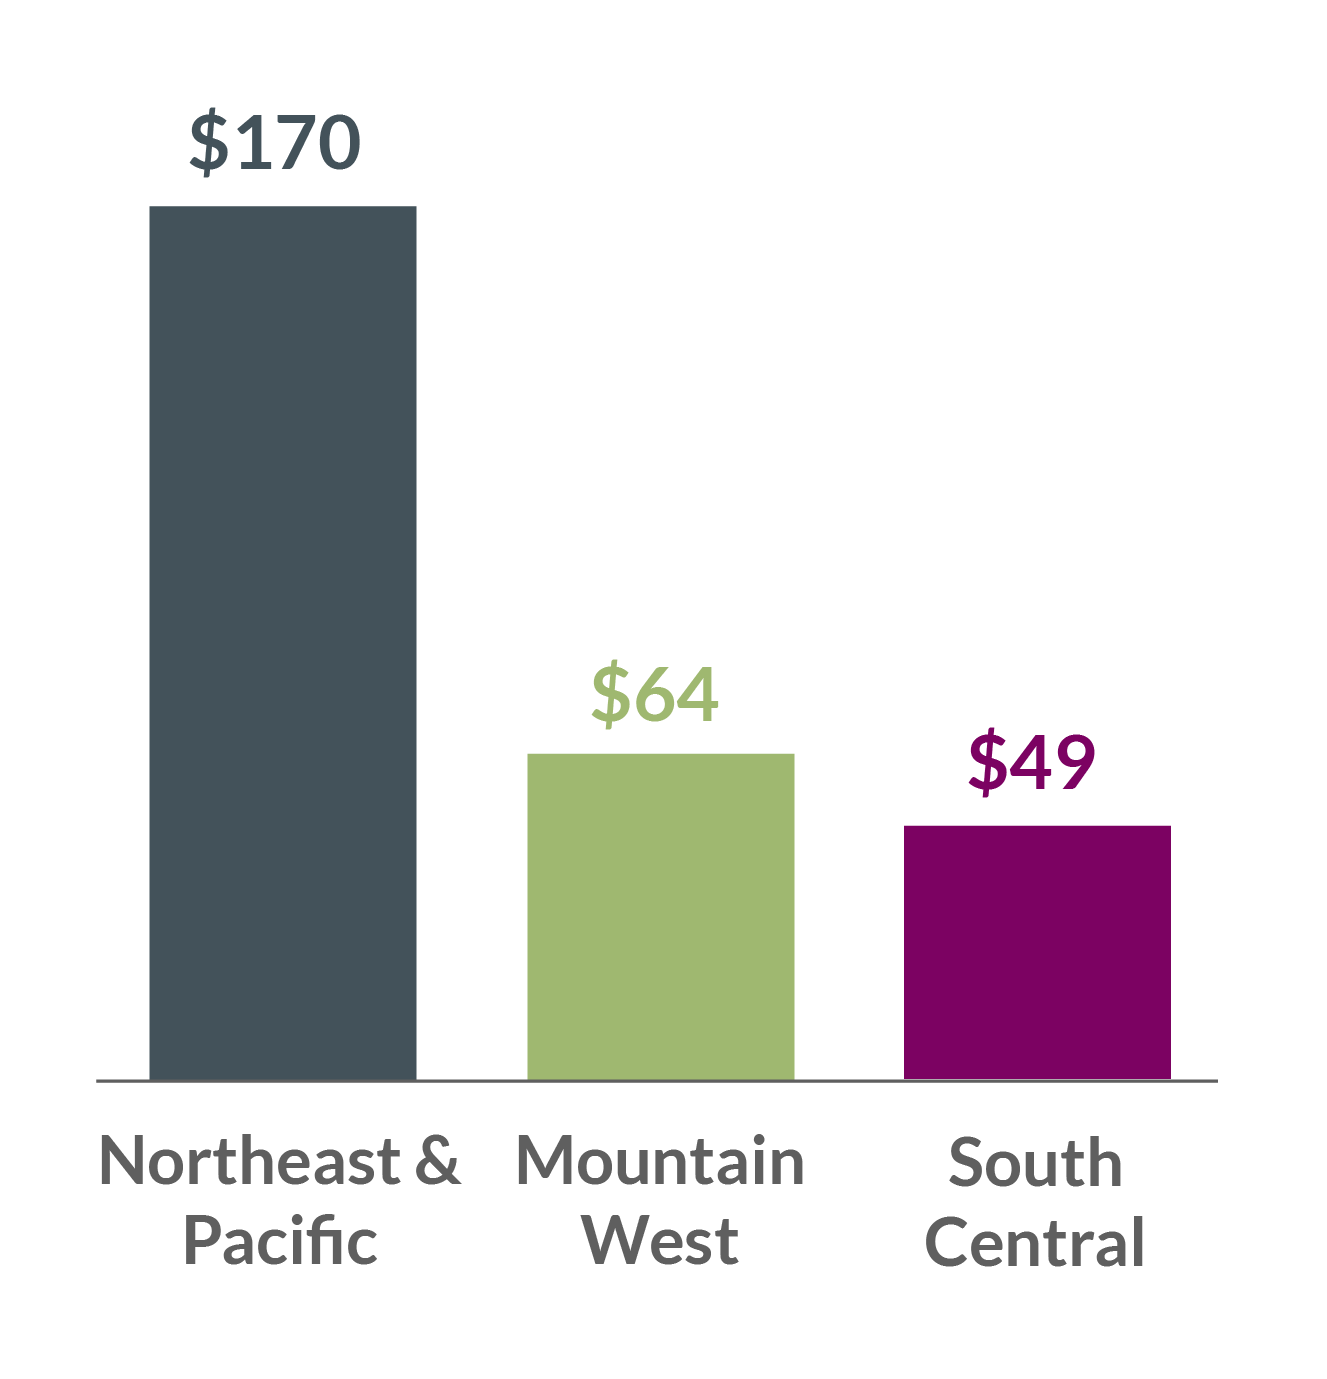 Bar graph - $170 Northeast & Pacific, $64 Mountain West, $49 South Central